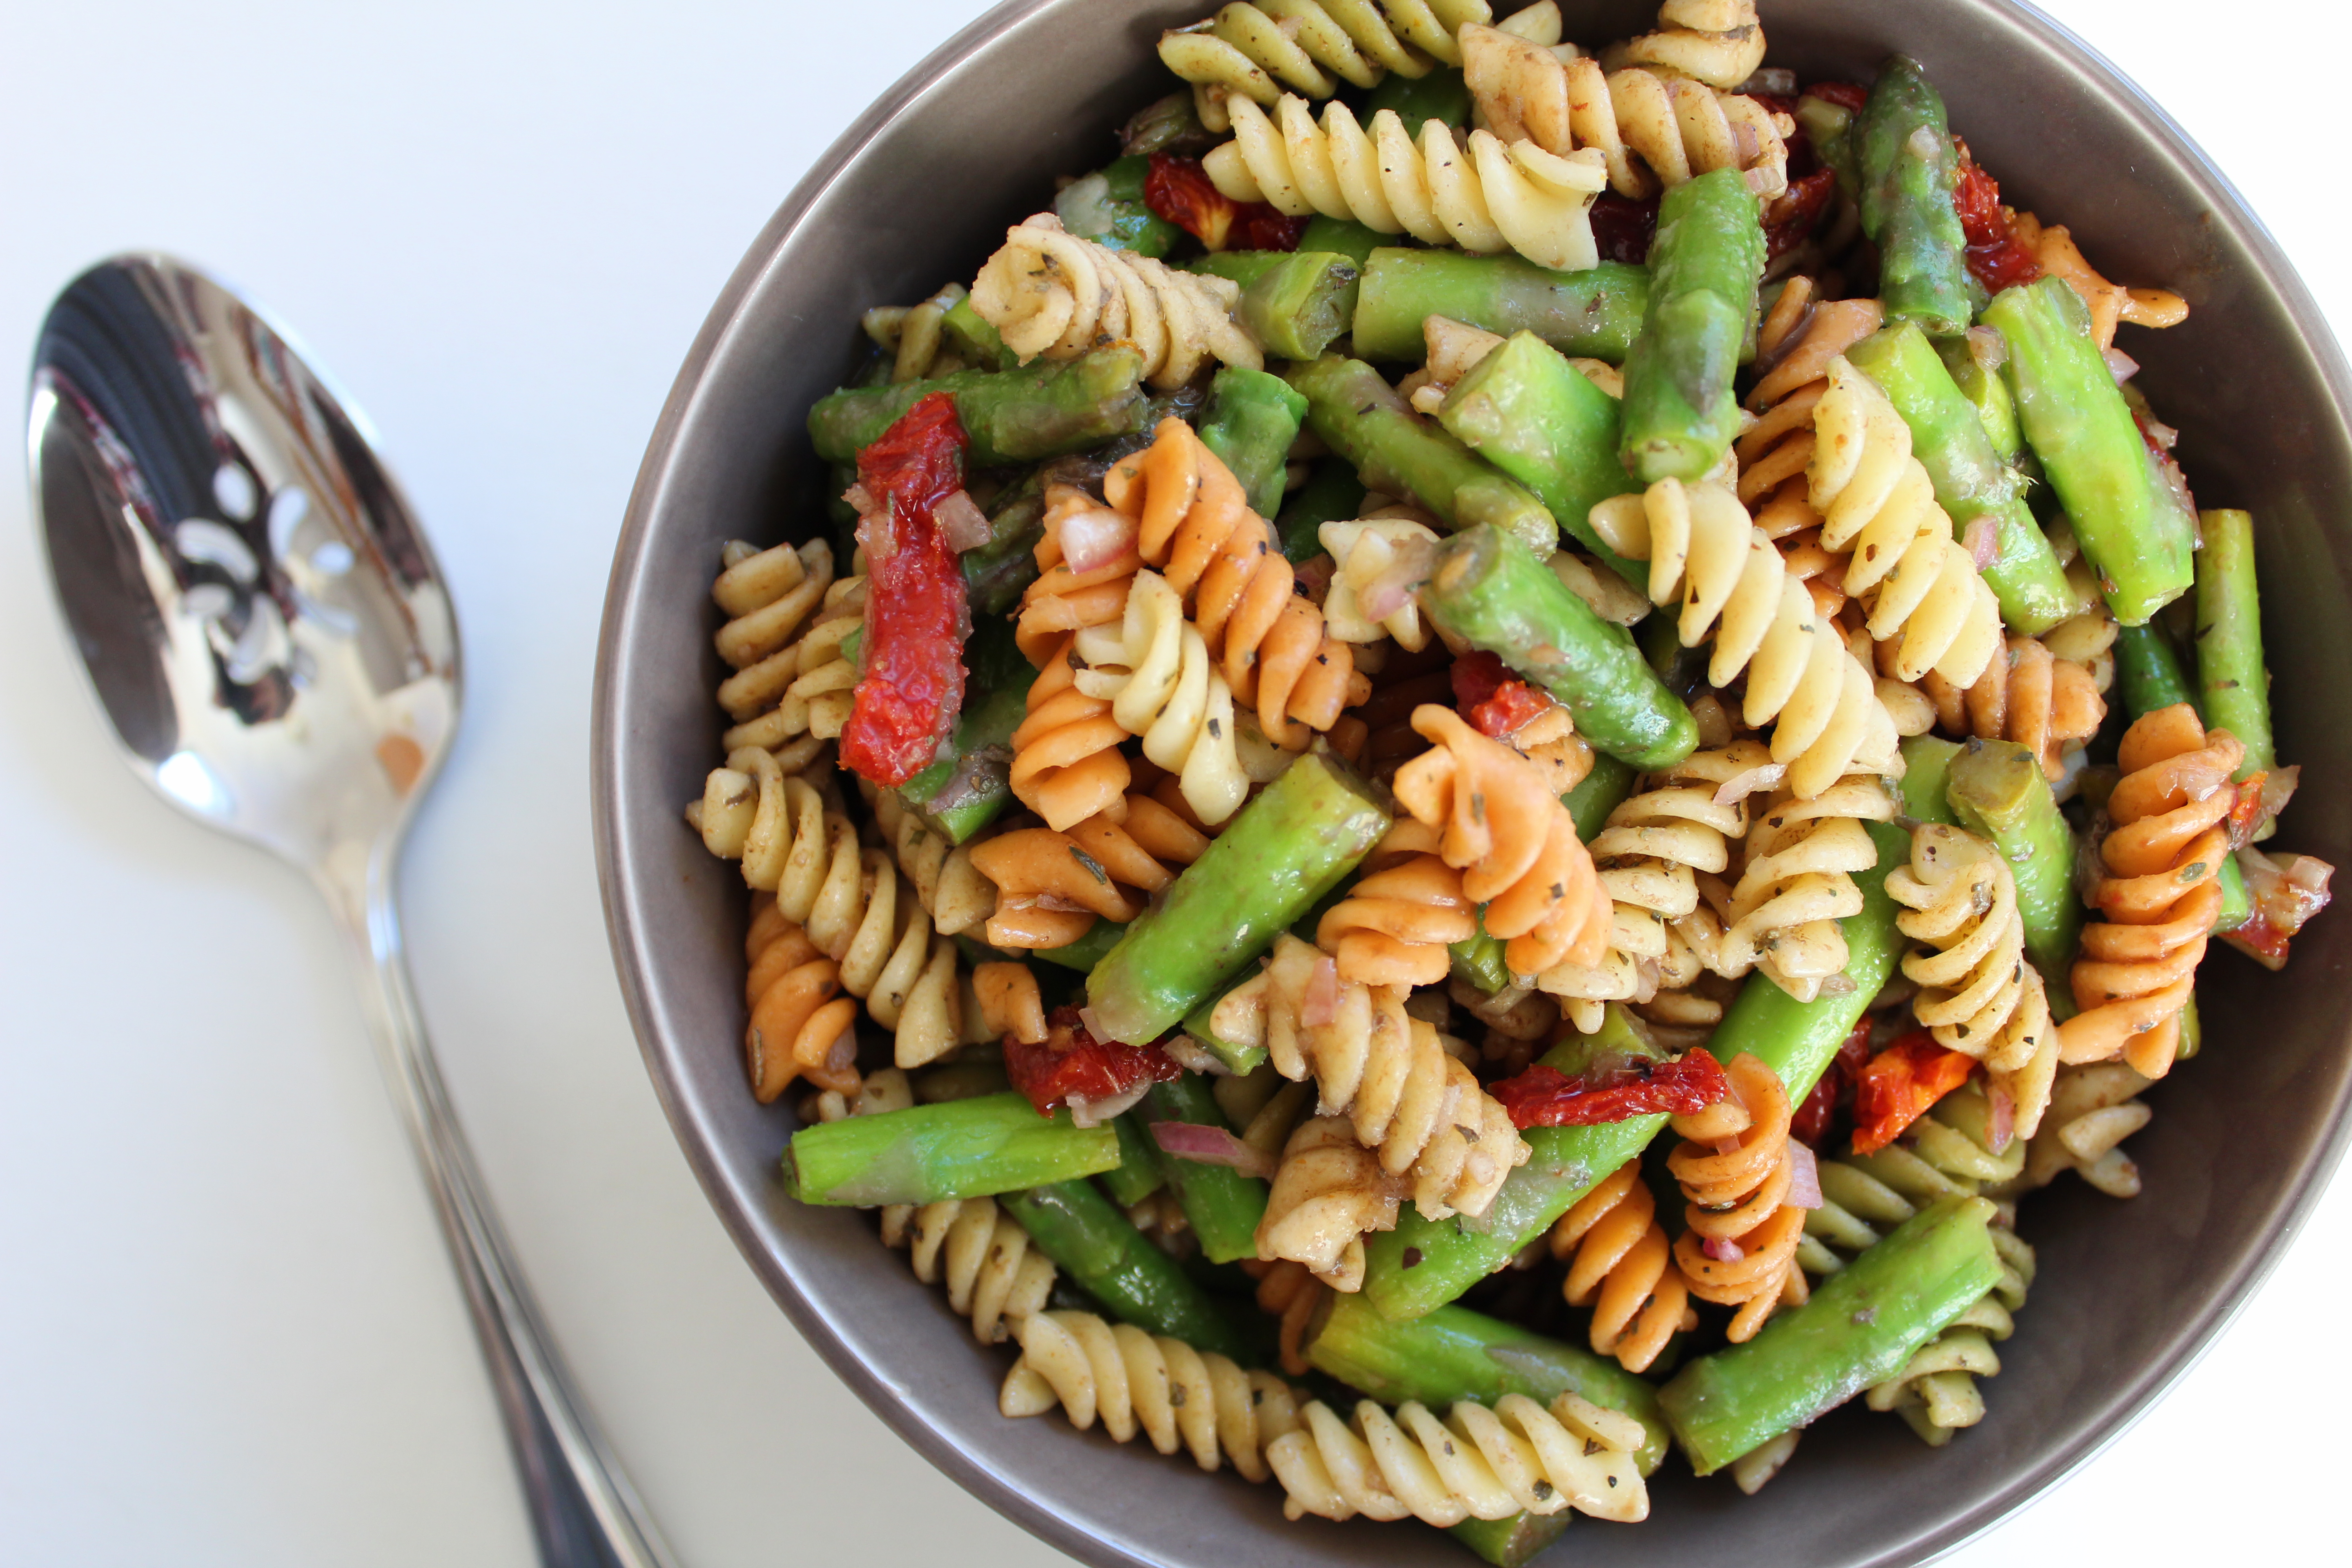 This fresh and bright pasta salad made with blanched asparagus, sun dried tomatoes, and a simple balsamic vinaigrette is perfect for an easy side dish or a simple lunch!